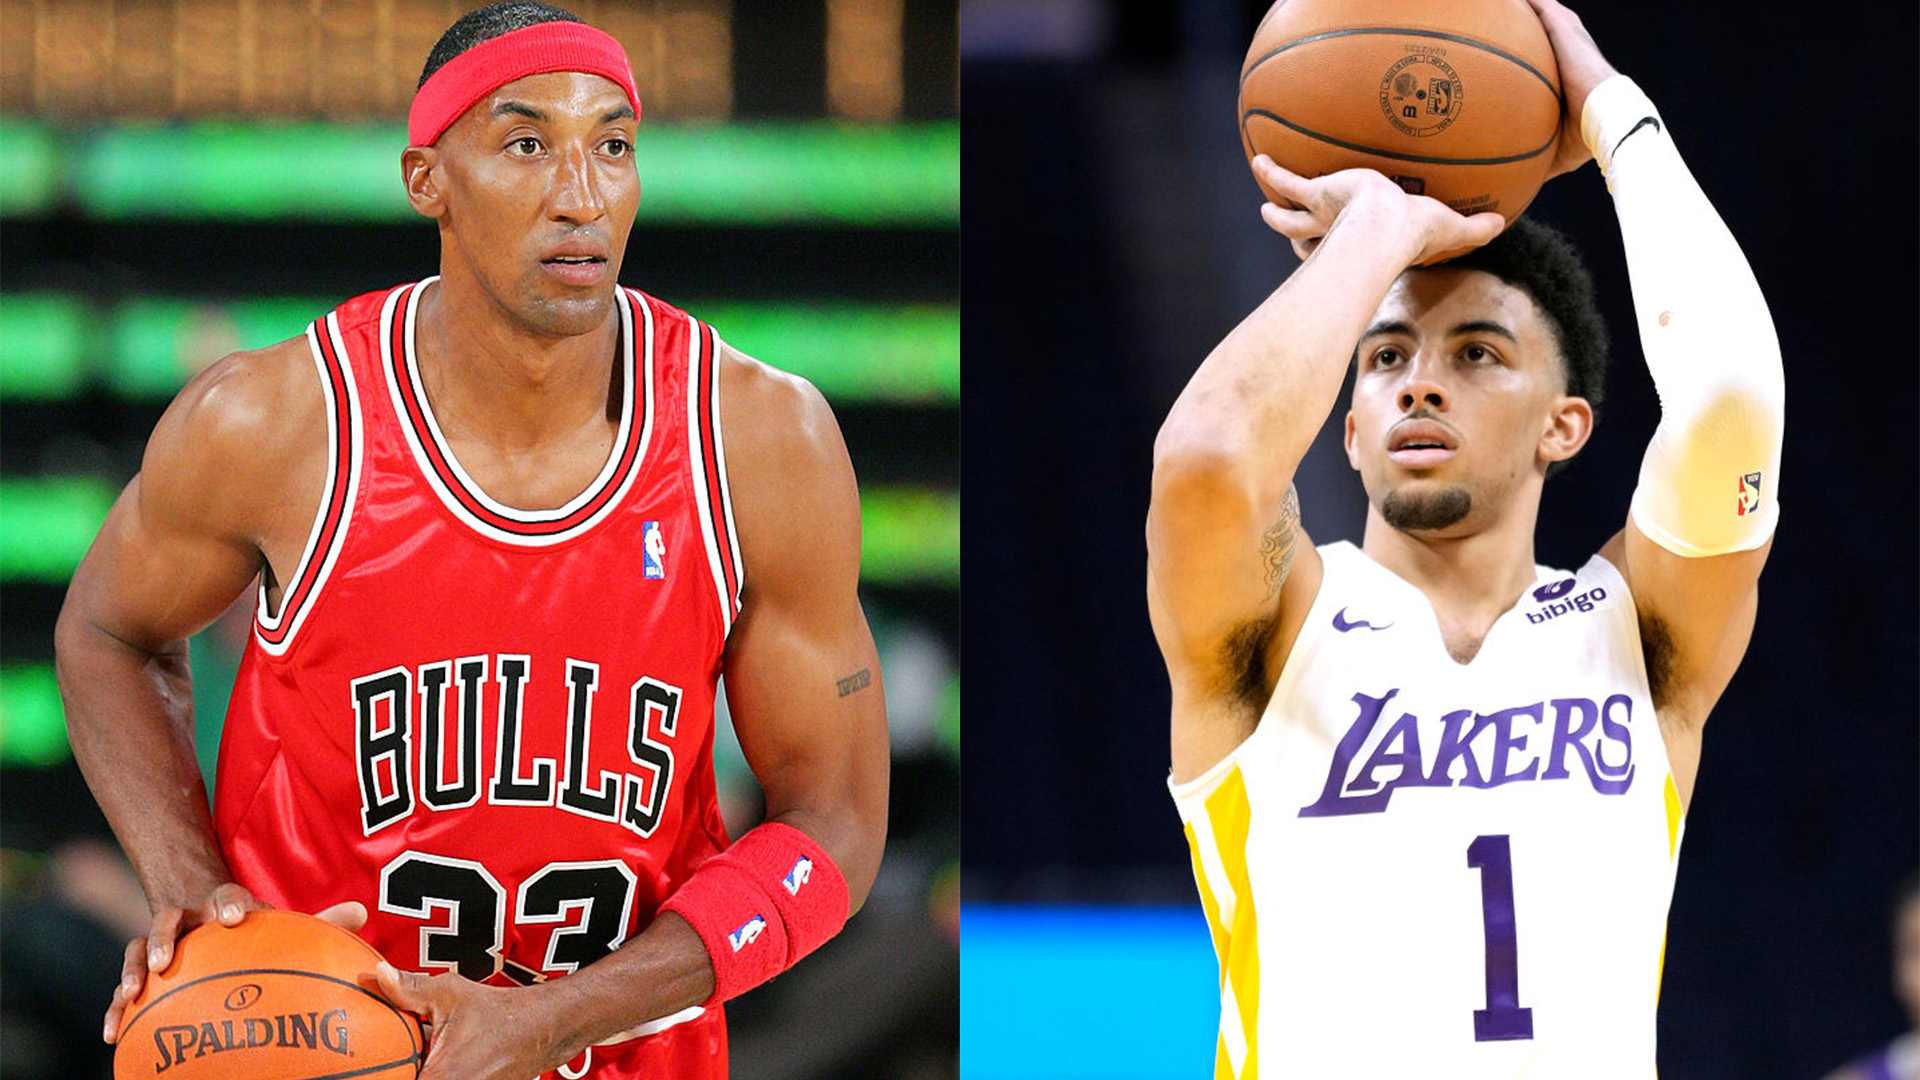 Neiman Marcus Offers The Chance To 'Shoot Hoops' For $333K With Scottie Pippen And His Son